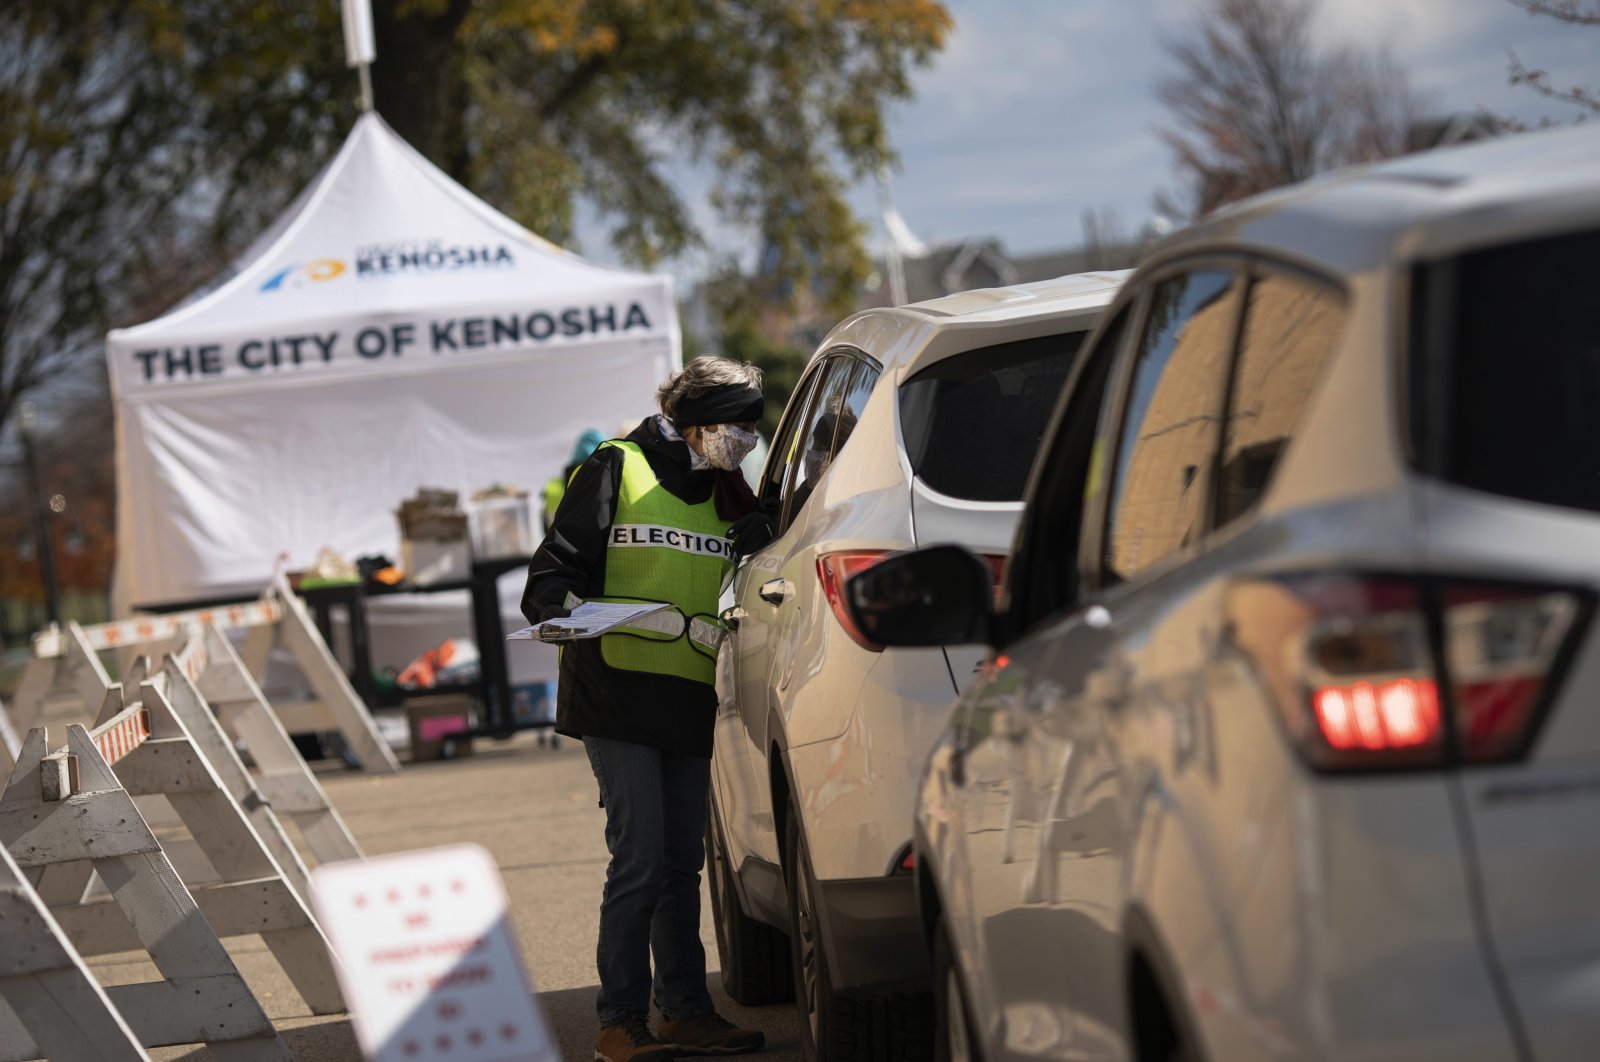 An elections staff member assists voters at Kenosha's municipal offices for drive-through early voting in Kenosha, Wisconsin, U.S., Oct. 30, 2020. (AP Photo)